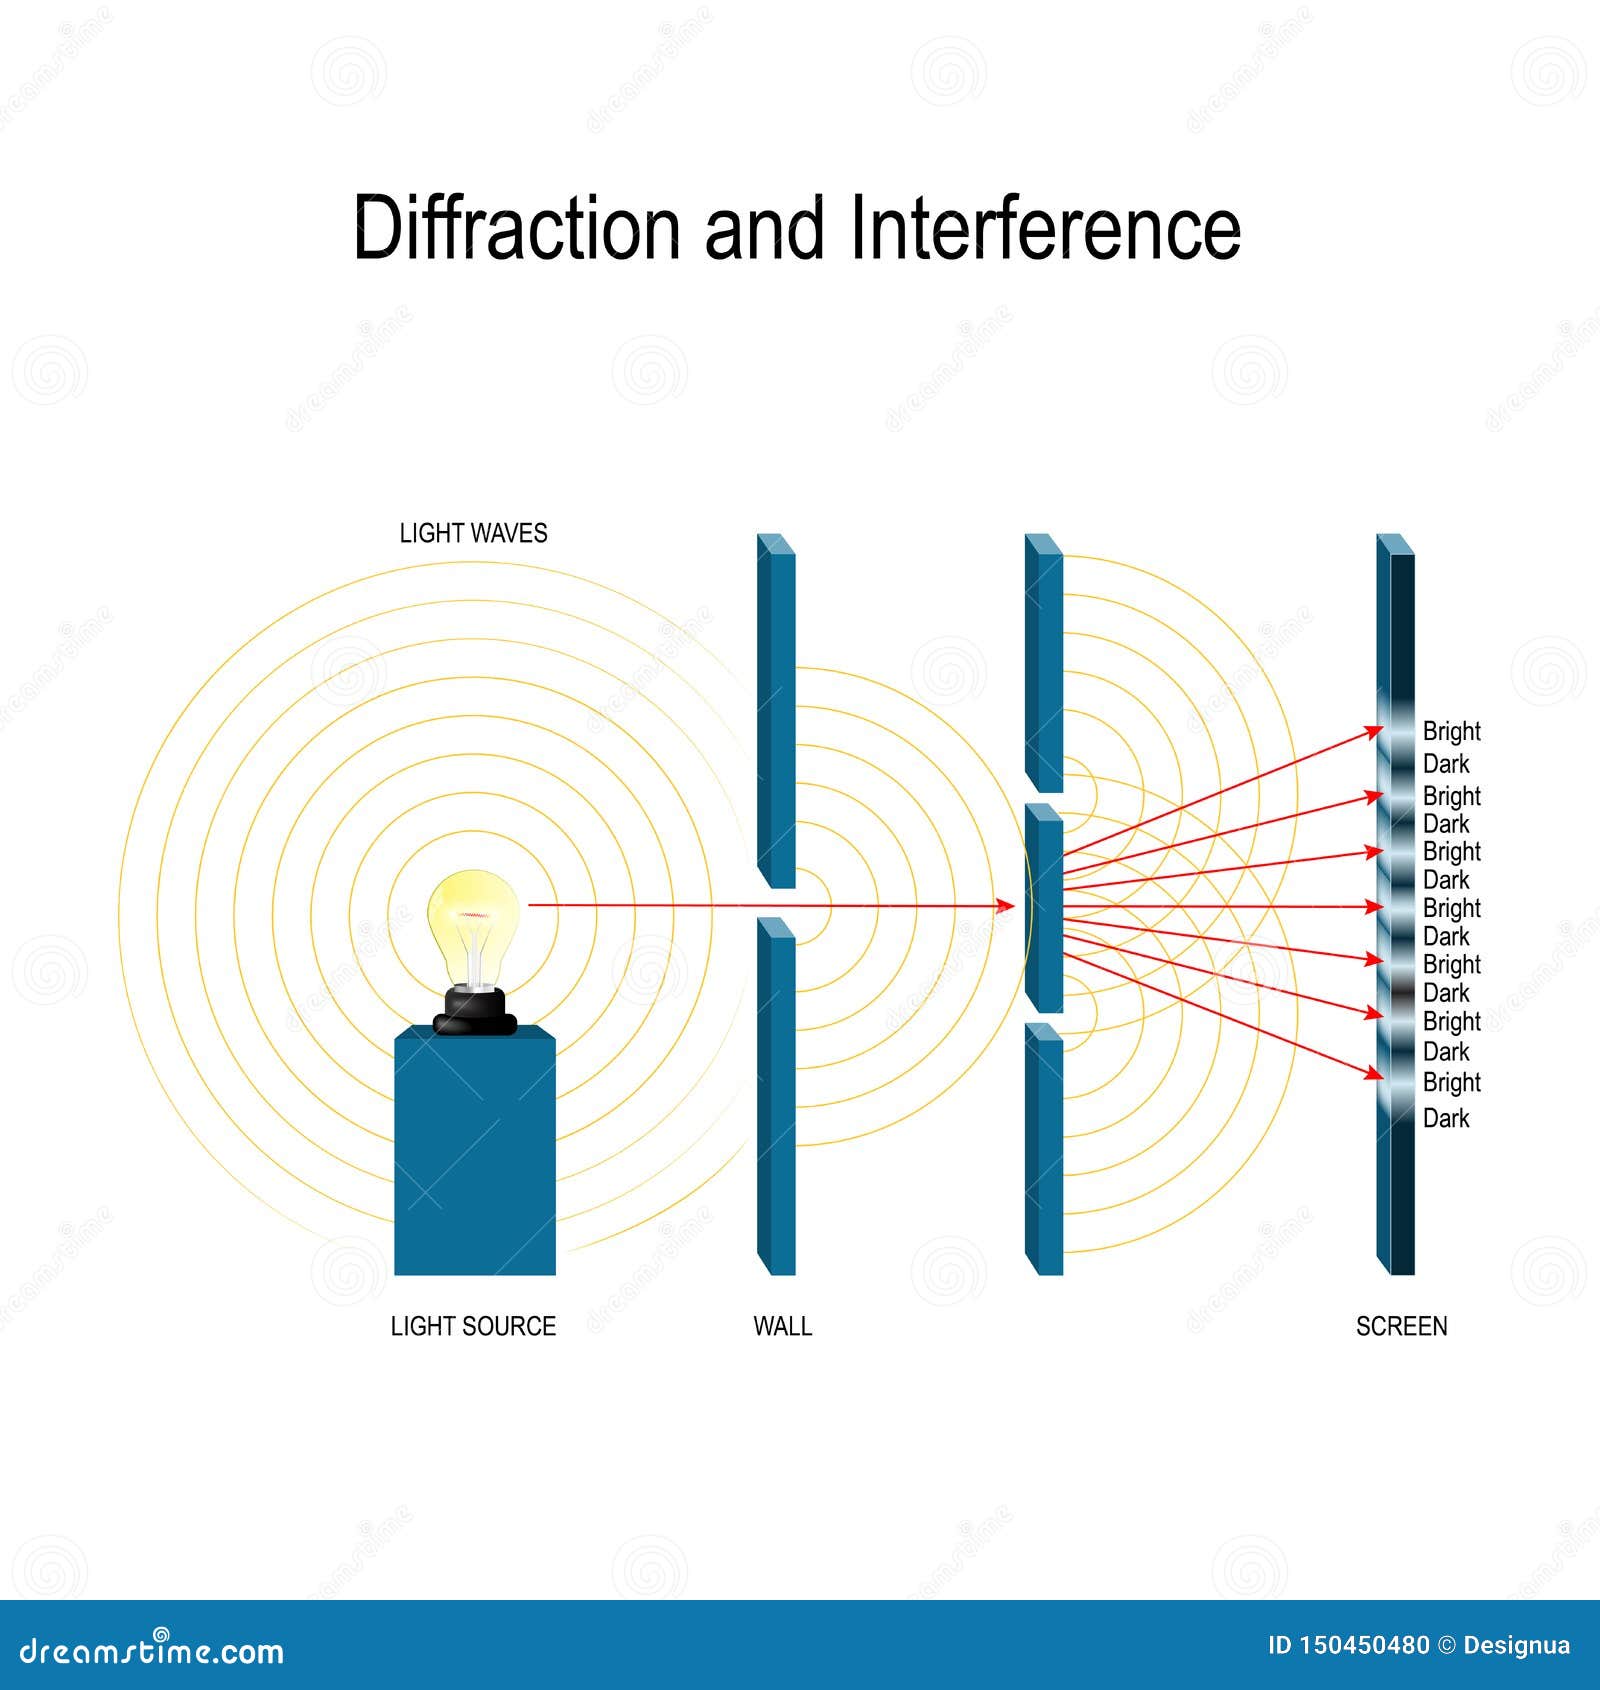 interference and diffraction of light waves